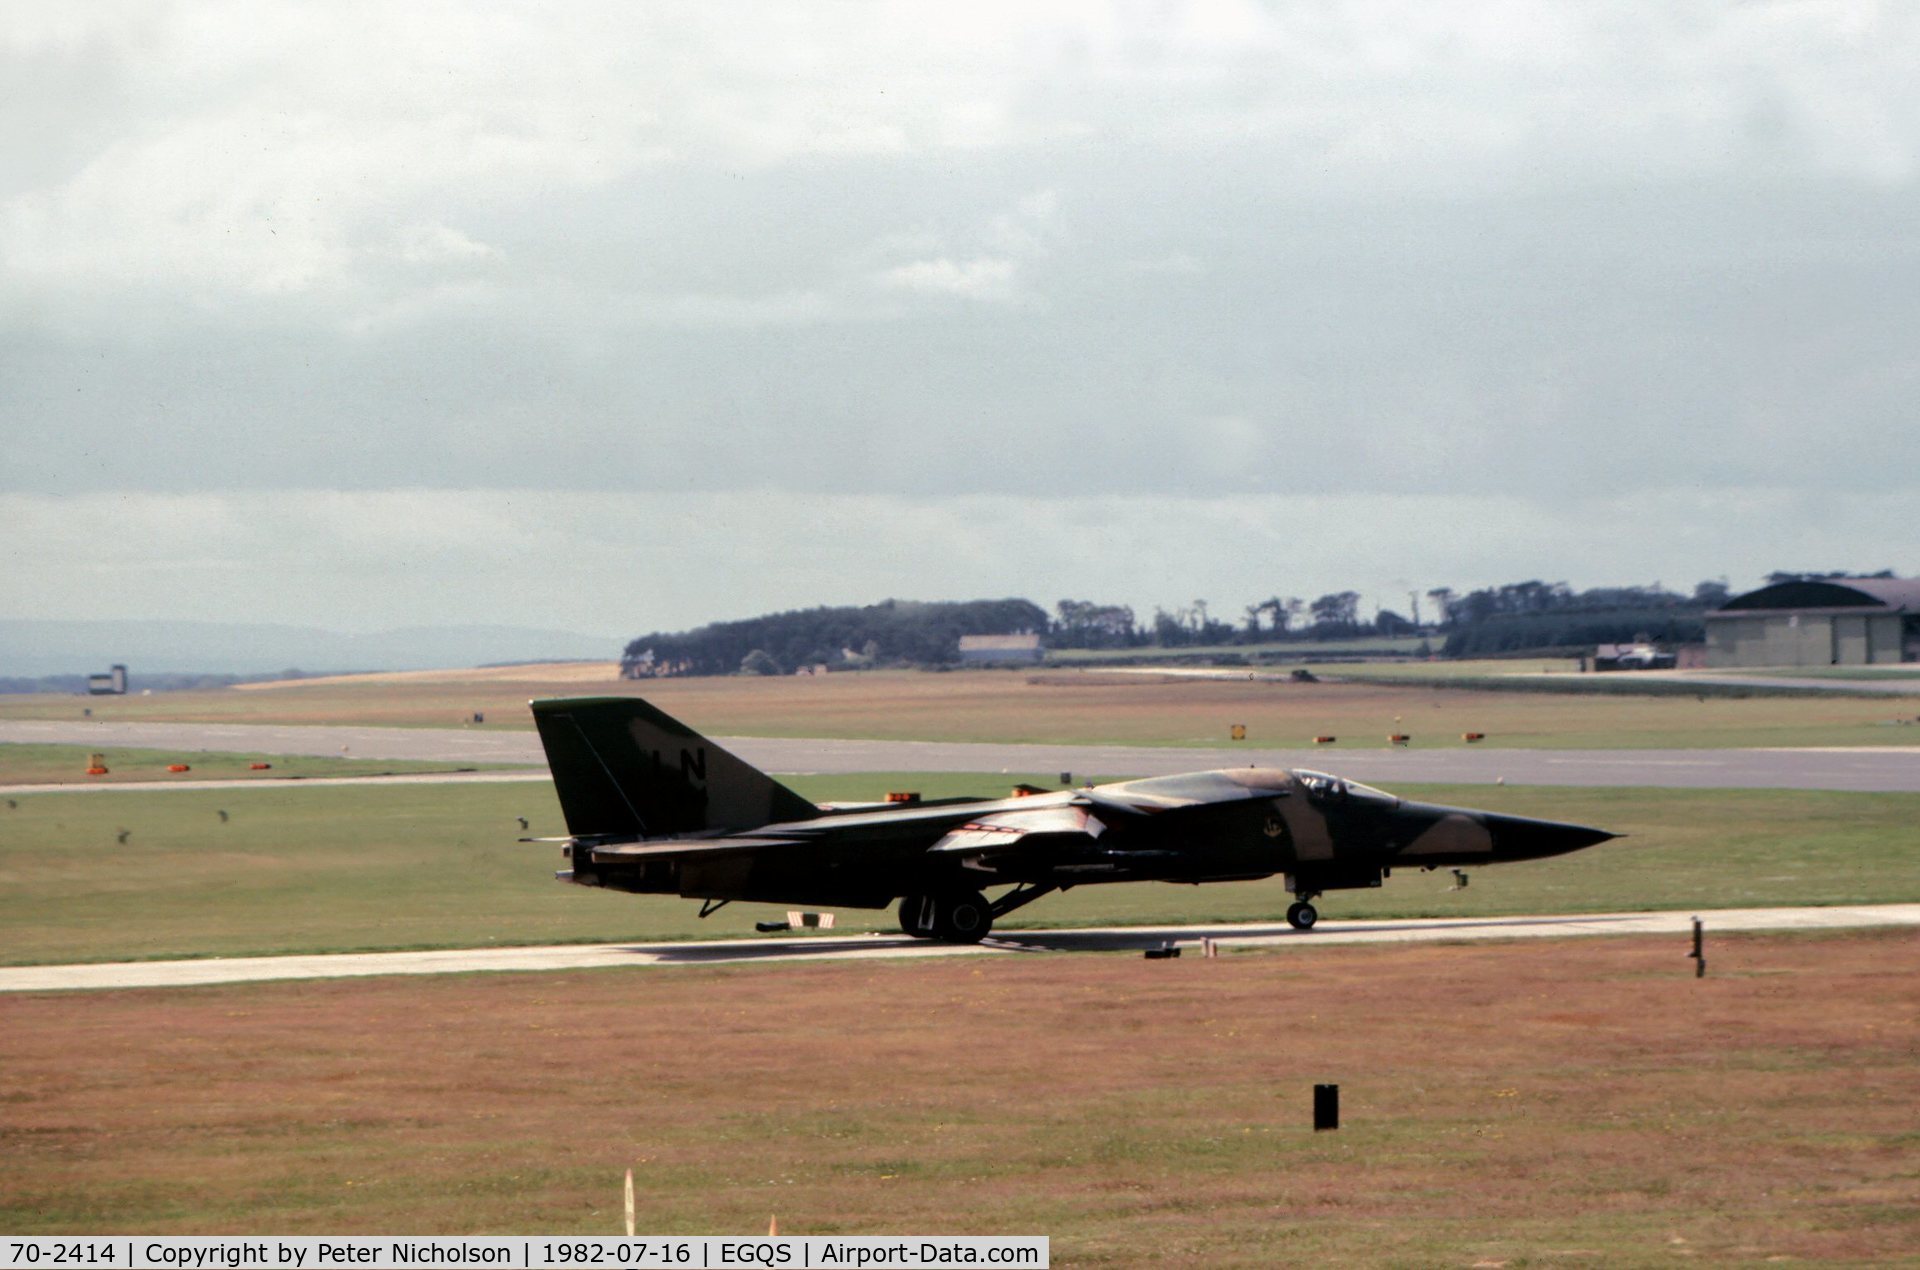 70-2414, 1970 General Dynamics F-111F Aardvark C/N E2-53, F-111F of 494th Tactical Fighter Squadron/48th Tactical Fighter Wing at RAF Lakenheath preparing to join the active runway at RAF Lossiemouth in the Summer of 1982.